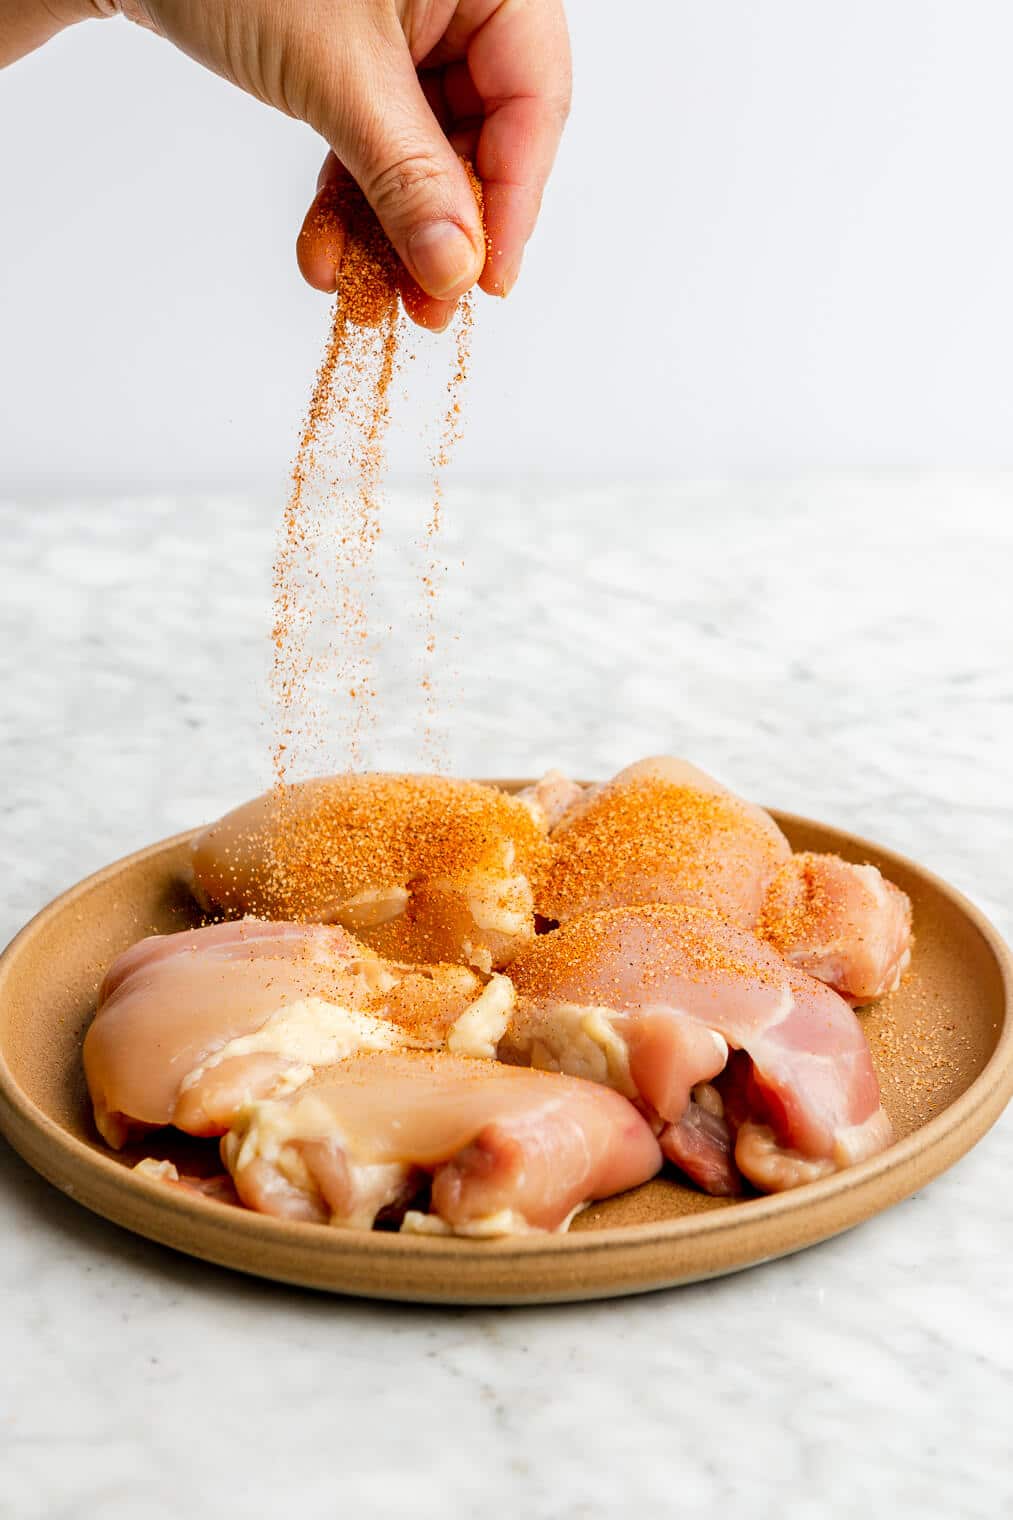 A person sprinkling cajun seasoning onto a plate of raw chicken thighs.